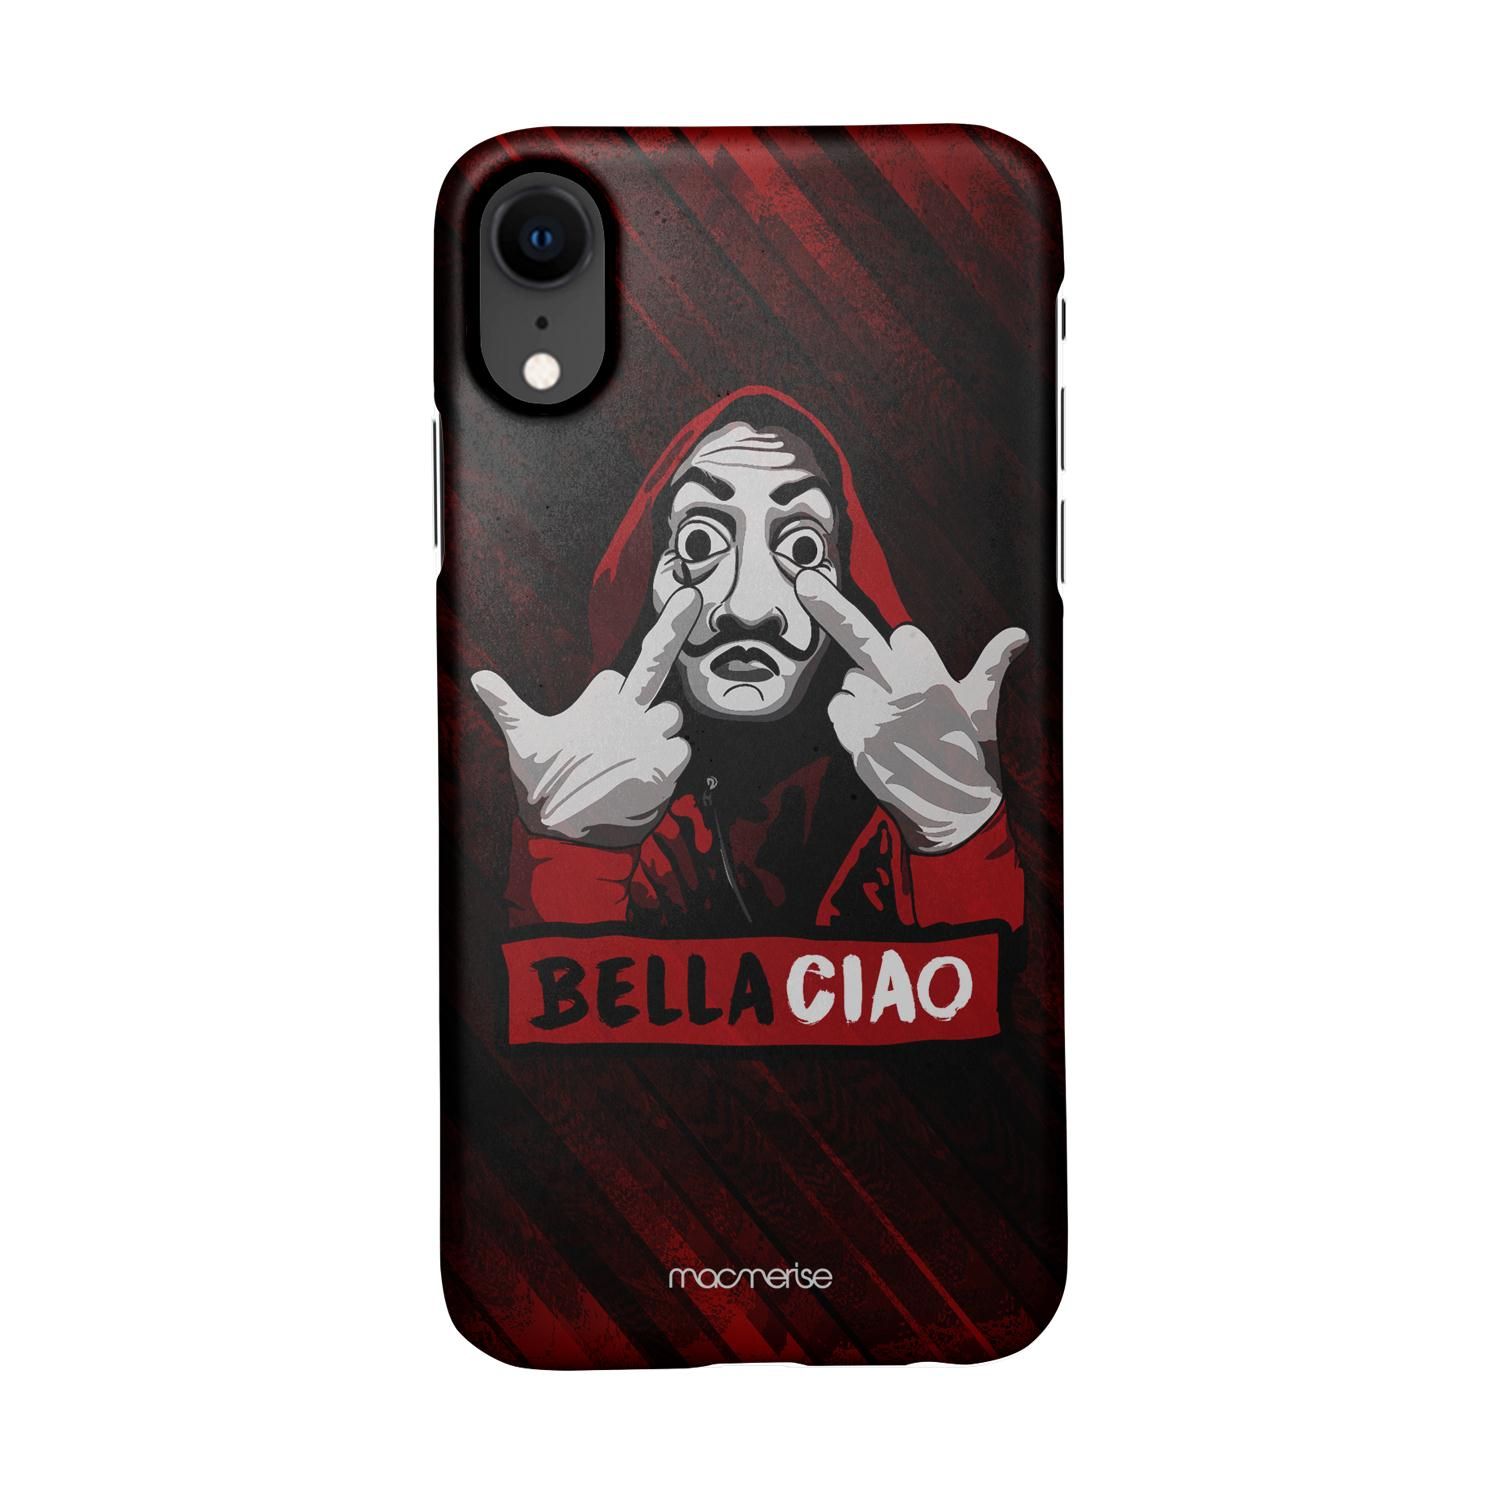 Buy Bella Ciao - Sleek Phone Case for iPhone XR Online